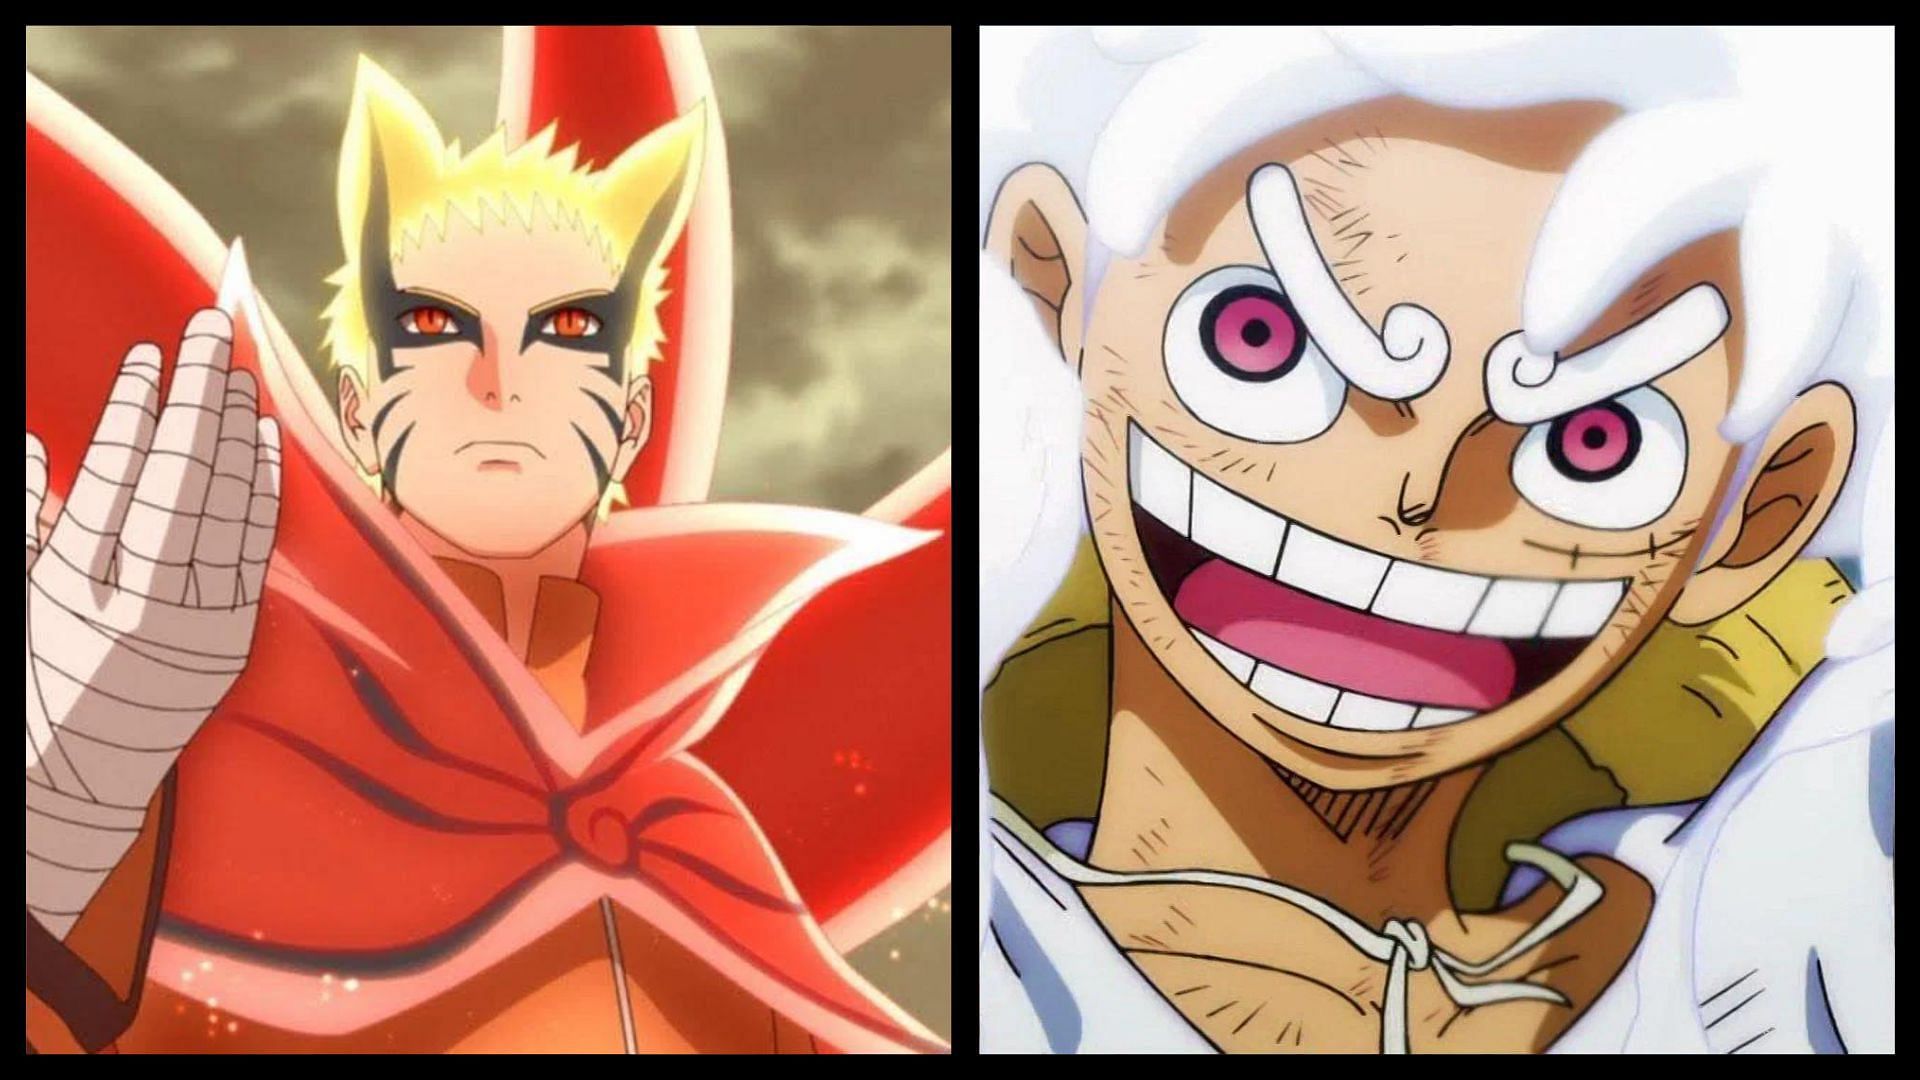 Forget Ultra Instinct, One Piece Gear 5 loses to Naruto